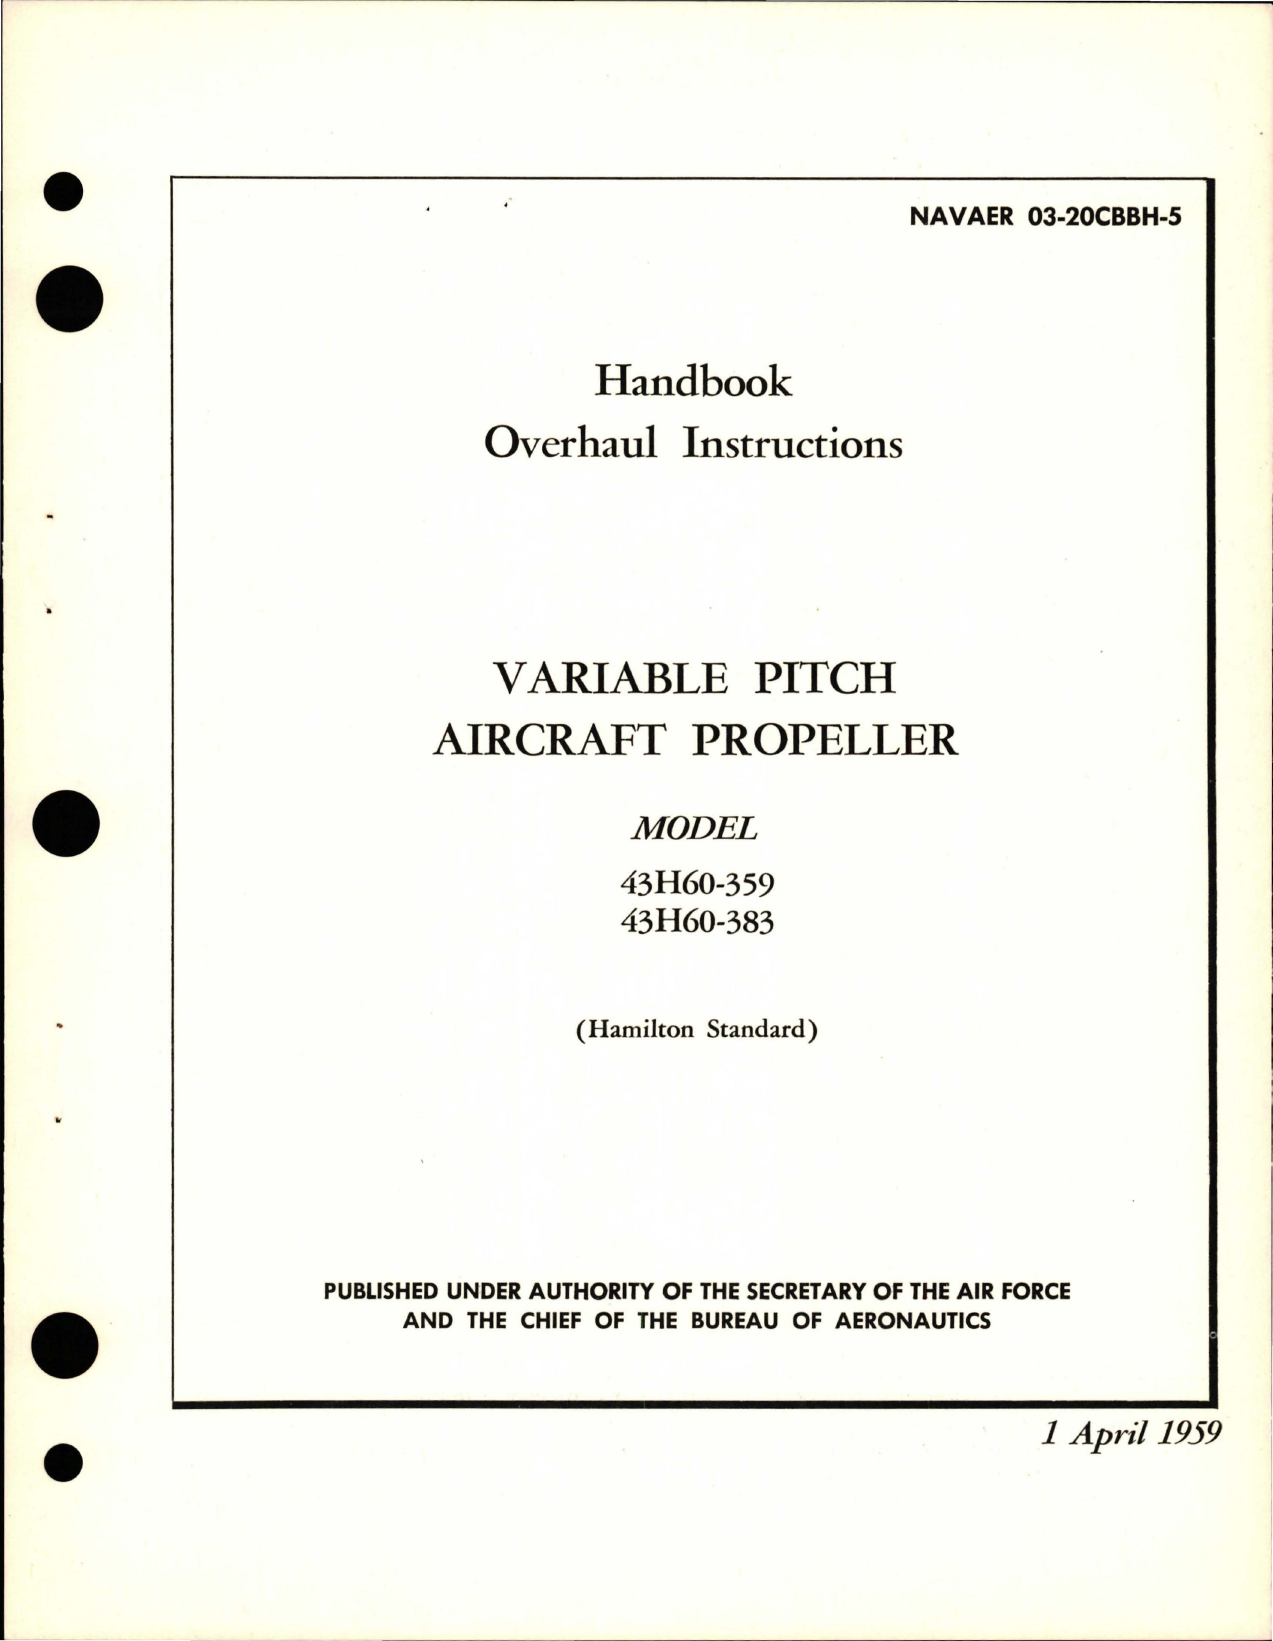 Sample page 1 from AirCorps Library document: Overhaul Instructions for Variable Pitch Propeller - Models 43H60-359 and 43H60-383